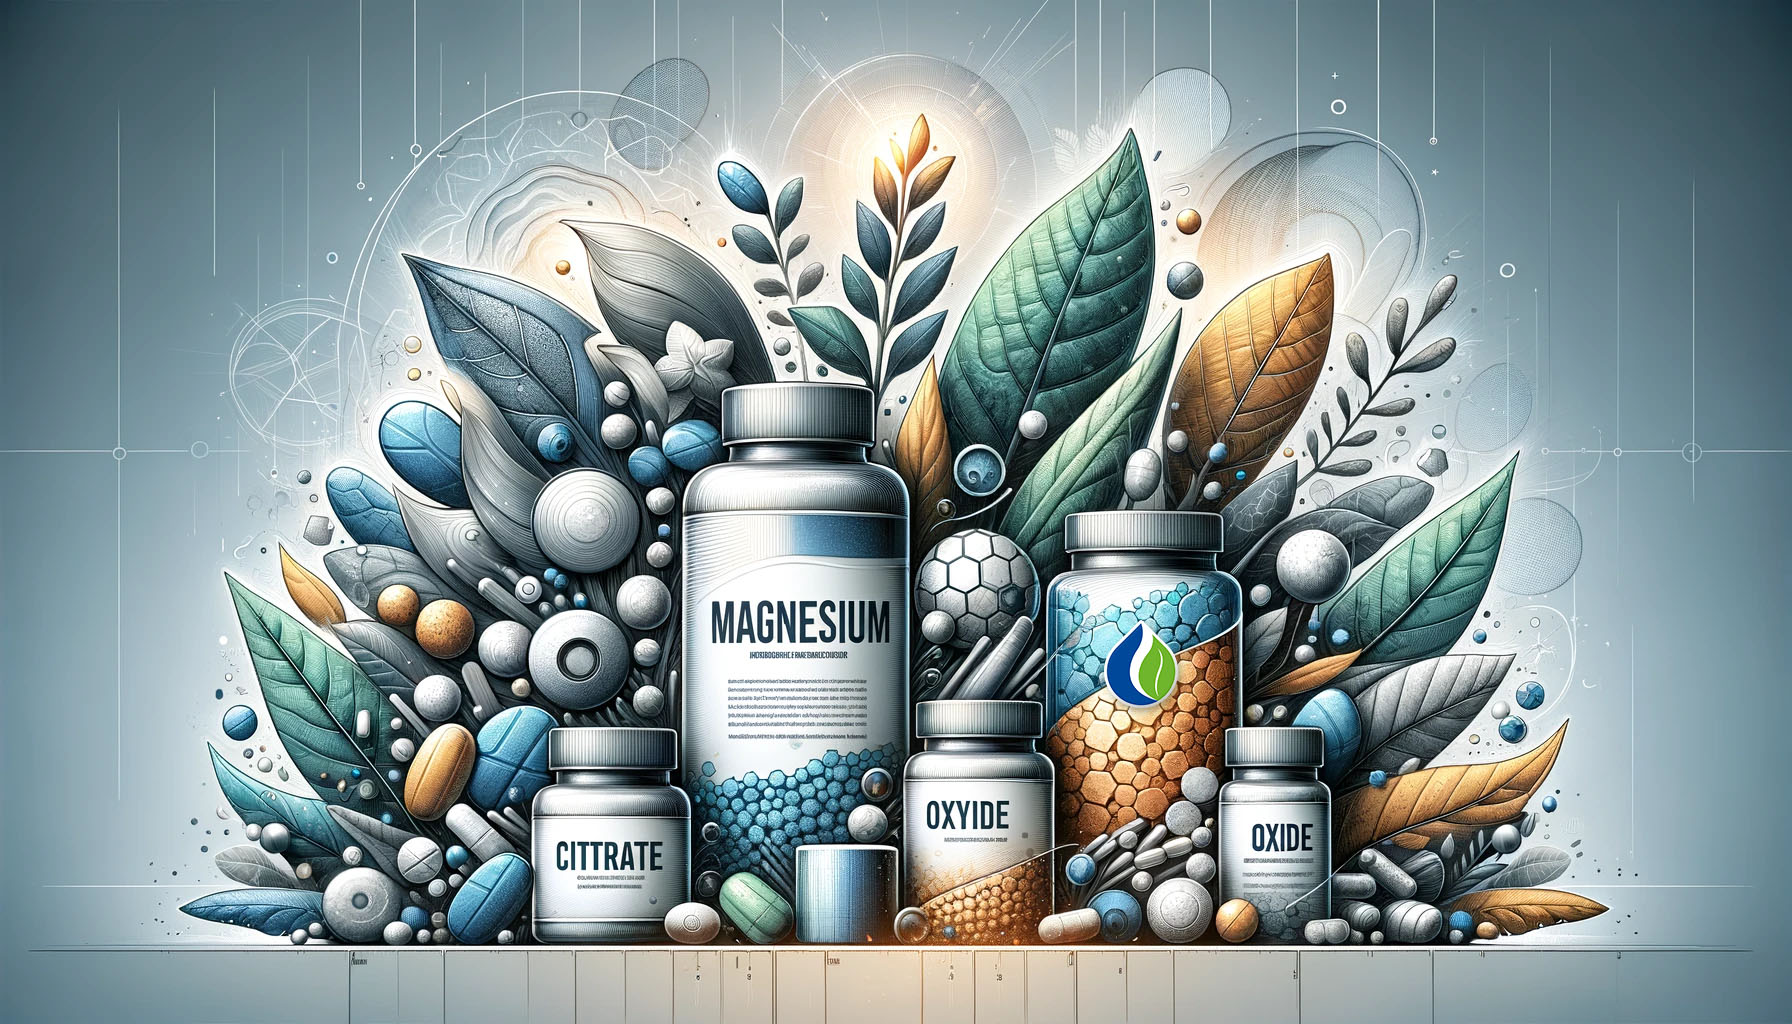 Magnesium types explained: from Citrate to Oxide